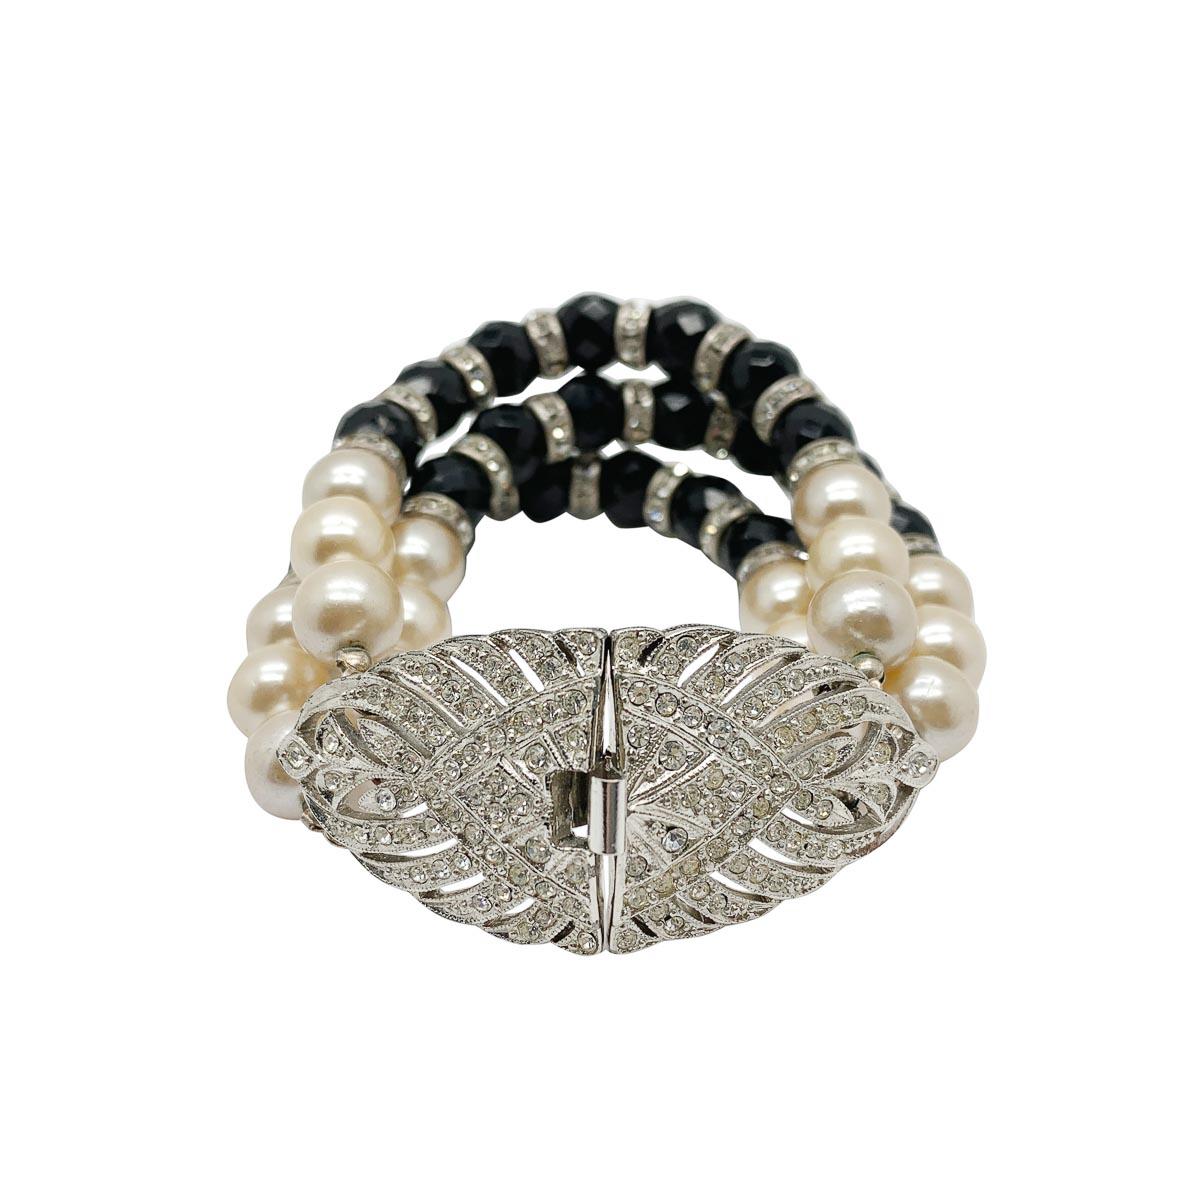 A seriously stylish vintage Sphinx Art Deco bracelet. Featuring a sublime clasp and a triple strand bracelet with faceted glass beads, crystal rhondelles and lustrous glass pearls.

Vintage Condition: Very good without damage or noteworthy